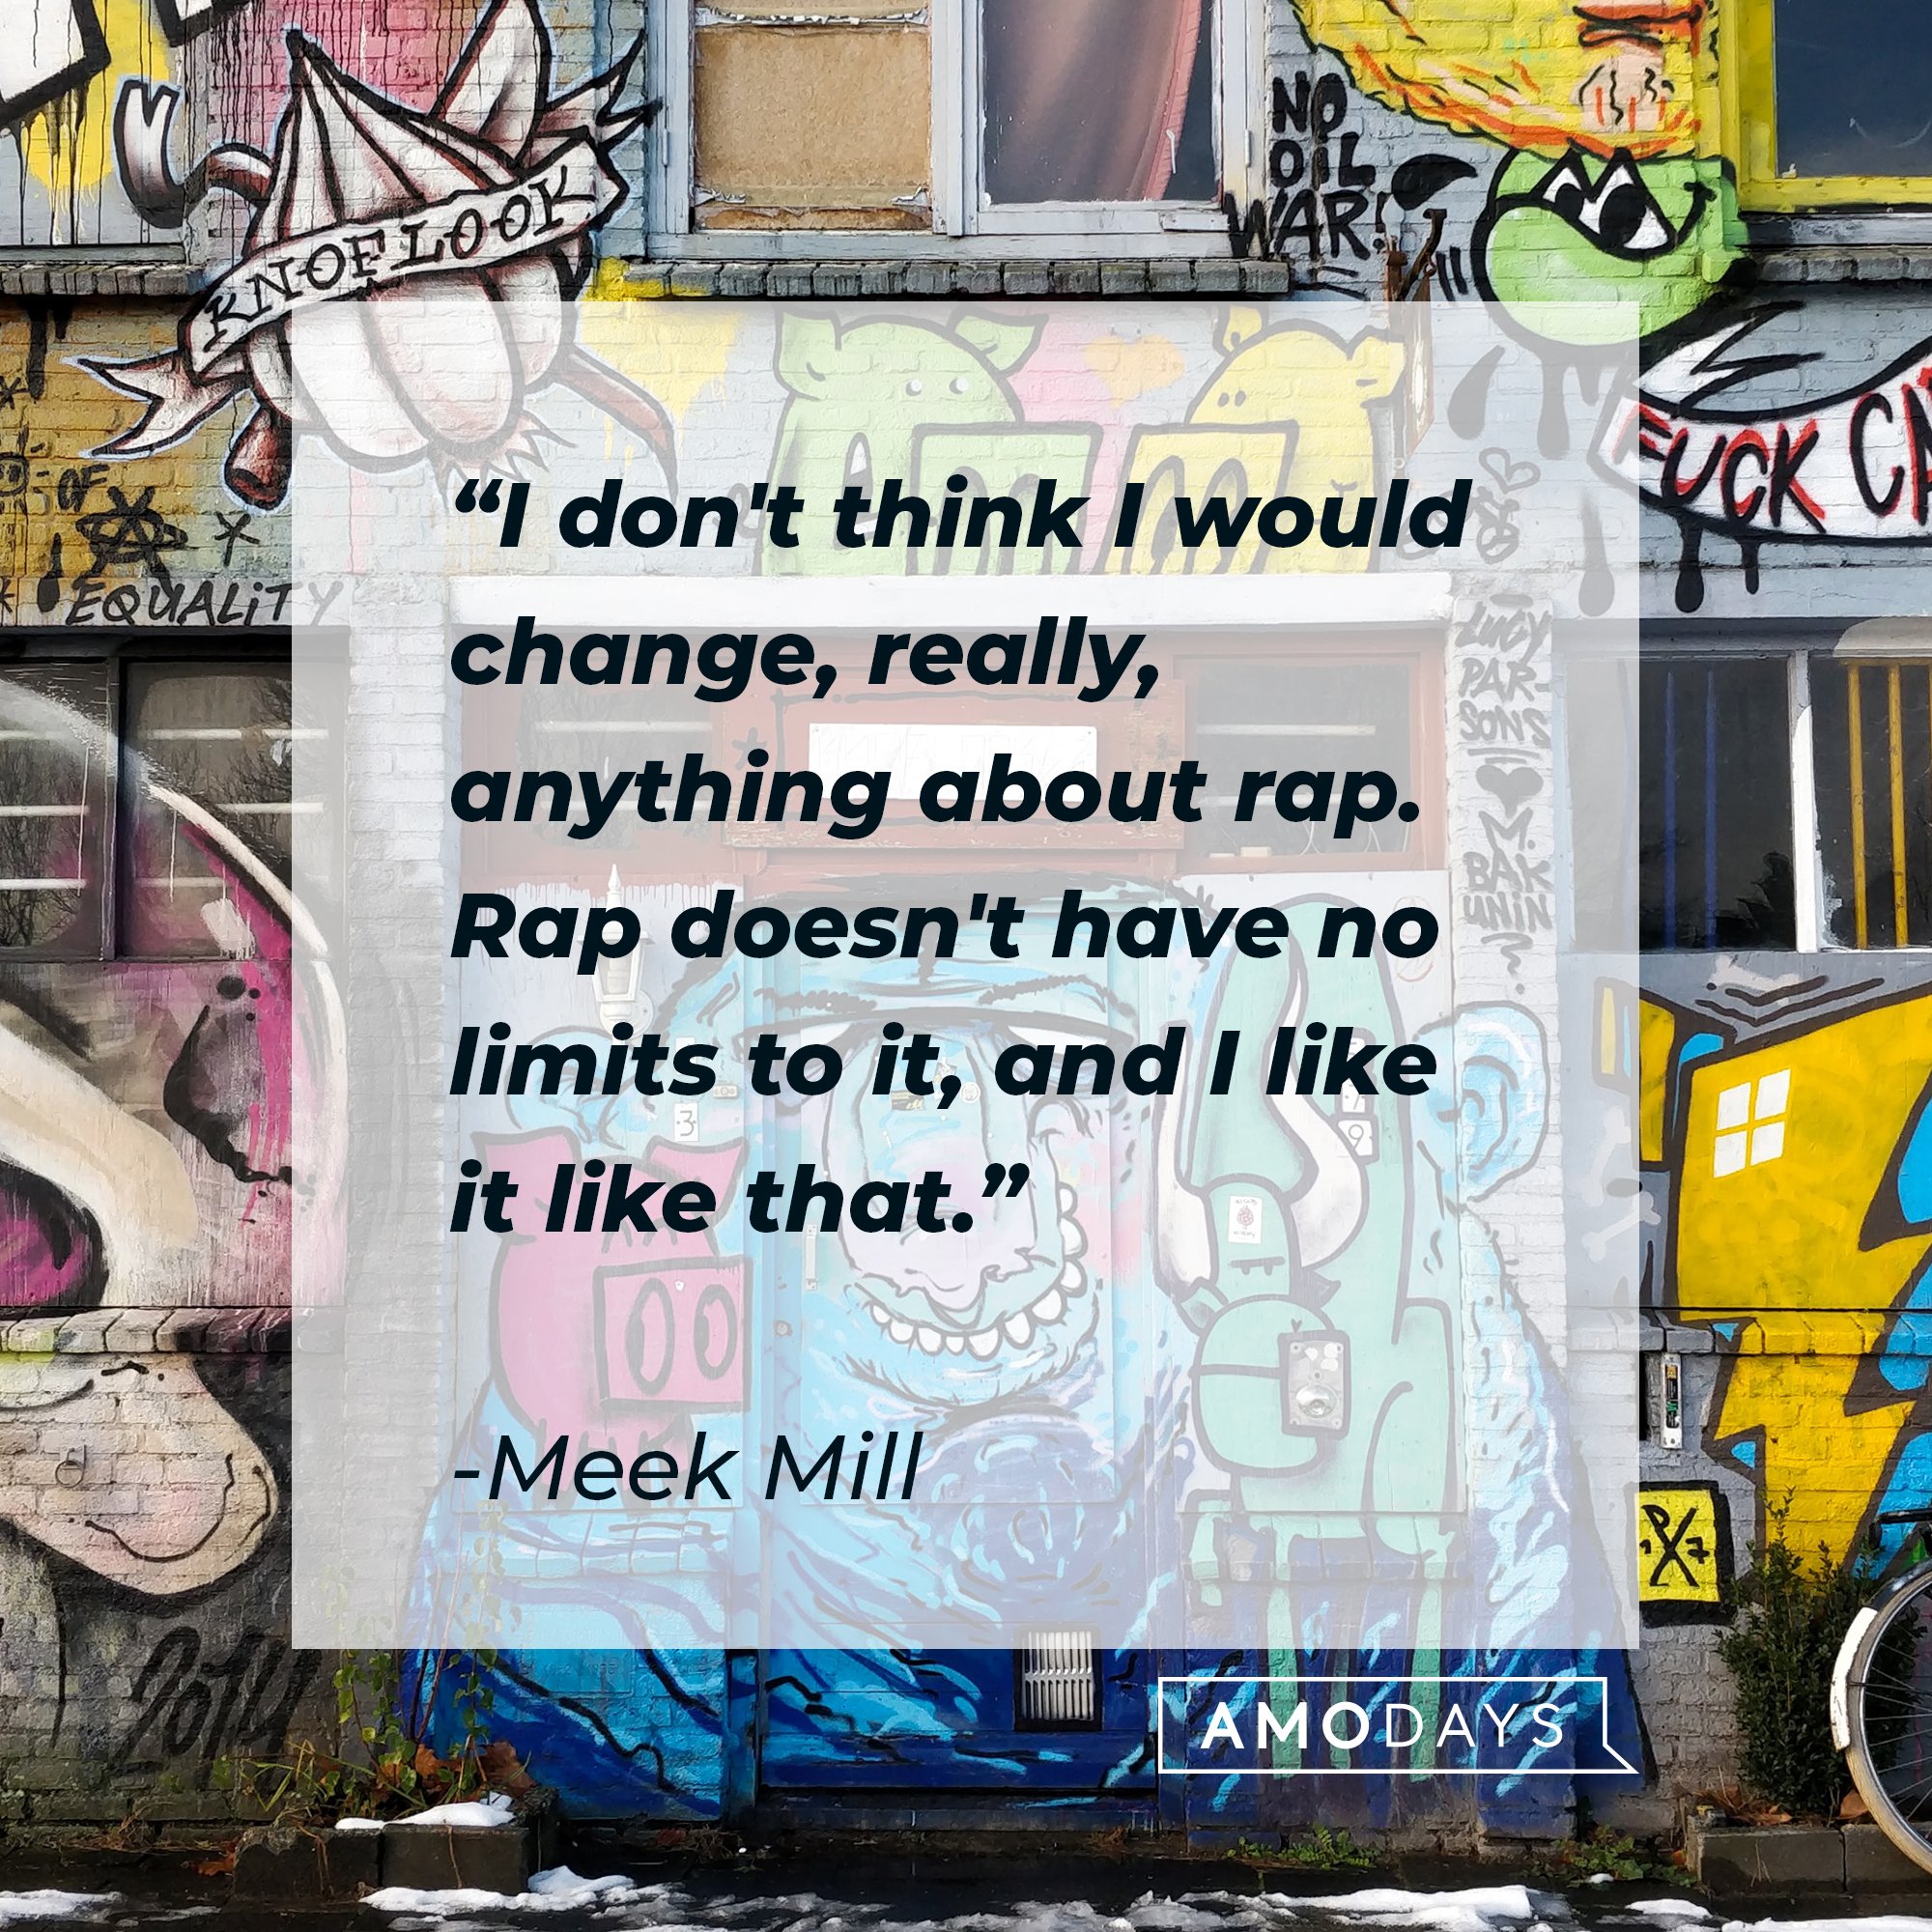  Meek Mill’s quote: "I don't think I would change, really, anything about rap. Rap doesn't have no limits to it, and I like it like that.” | Image: AmoDays 